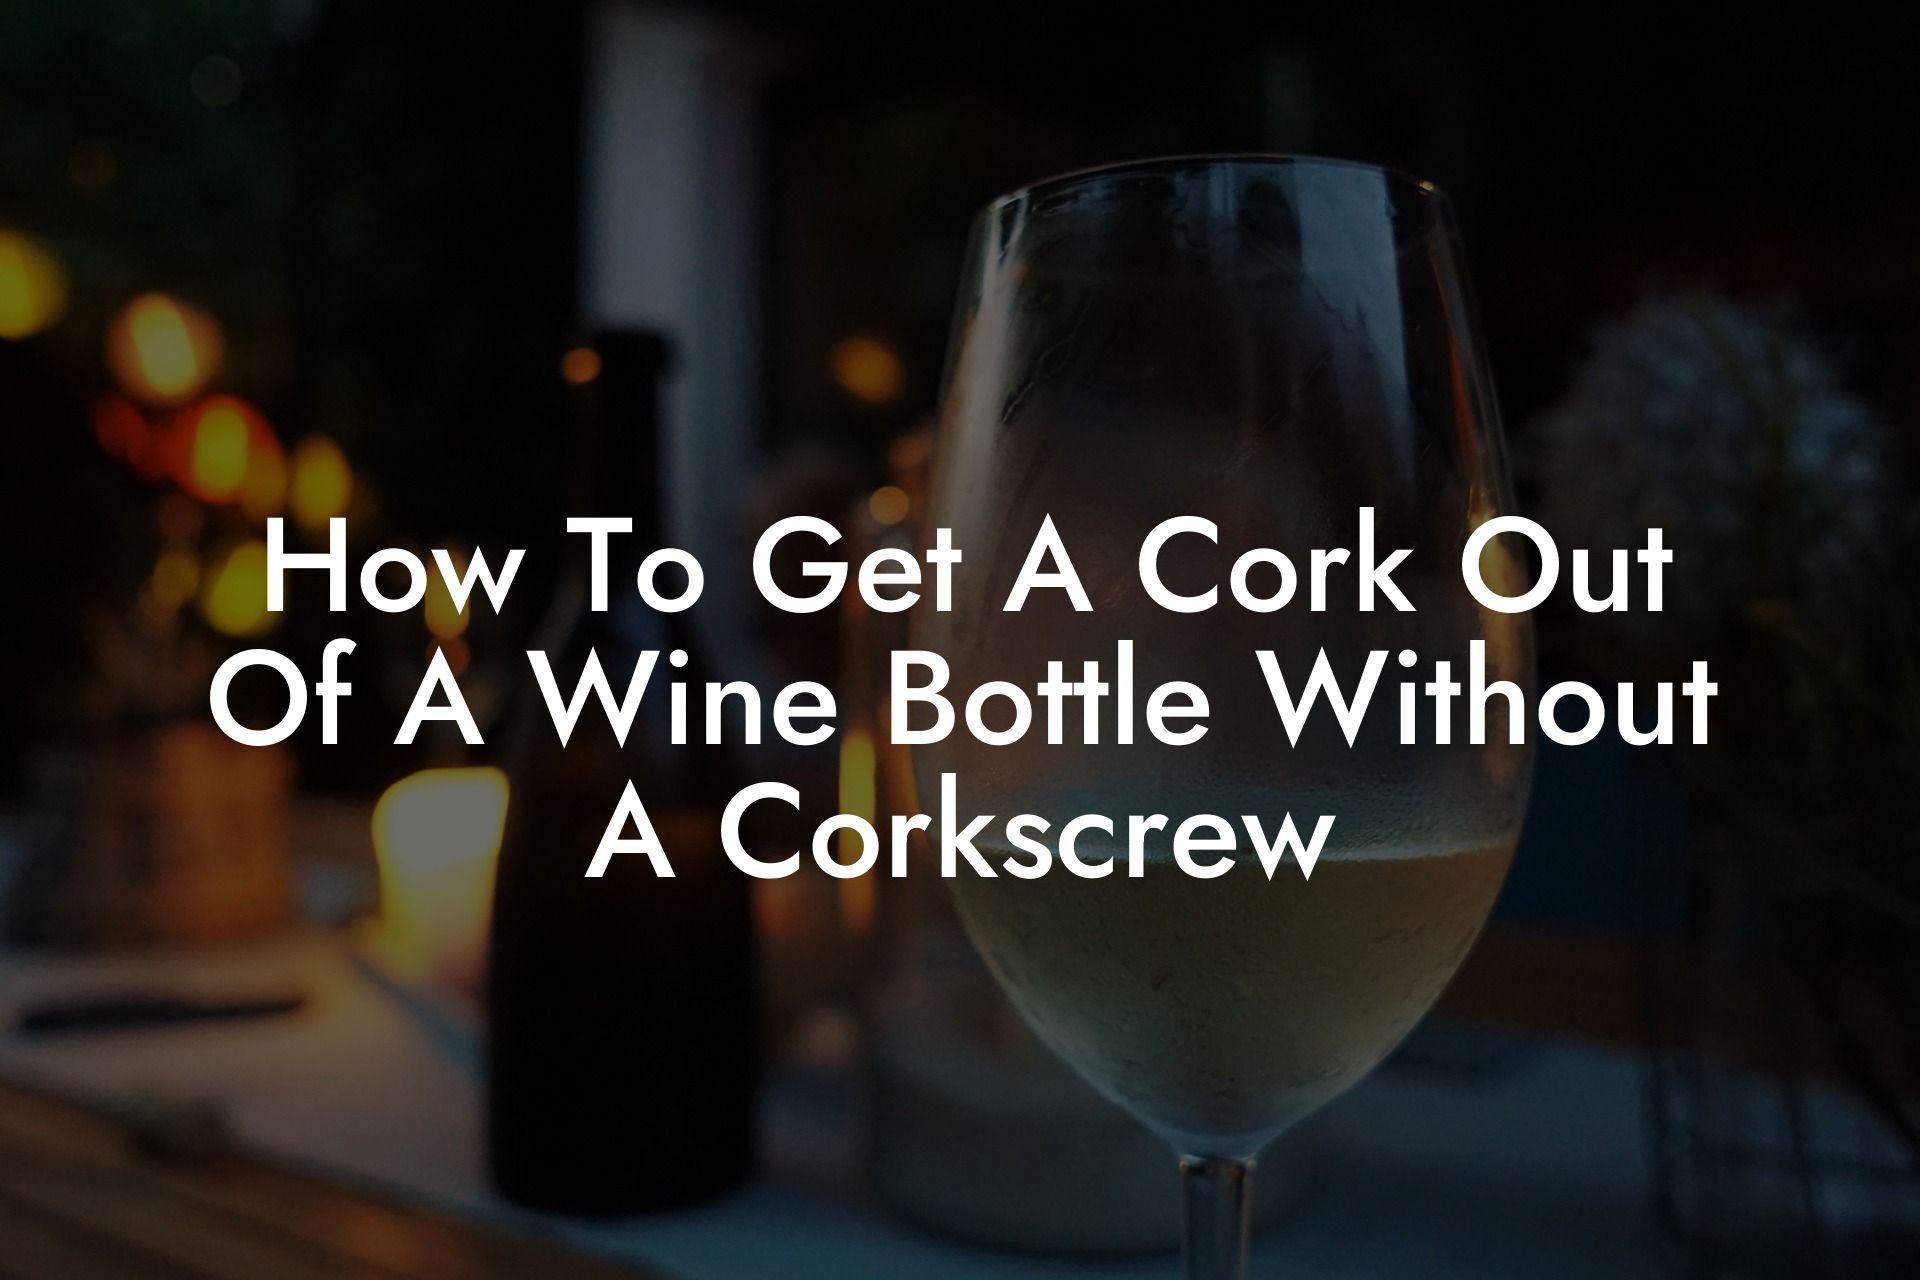 How To Get A Cork Out Of A Wine Bottle Without A Corkscrew